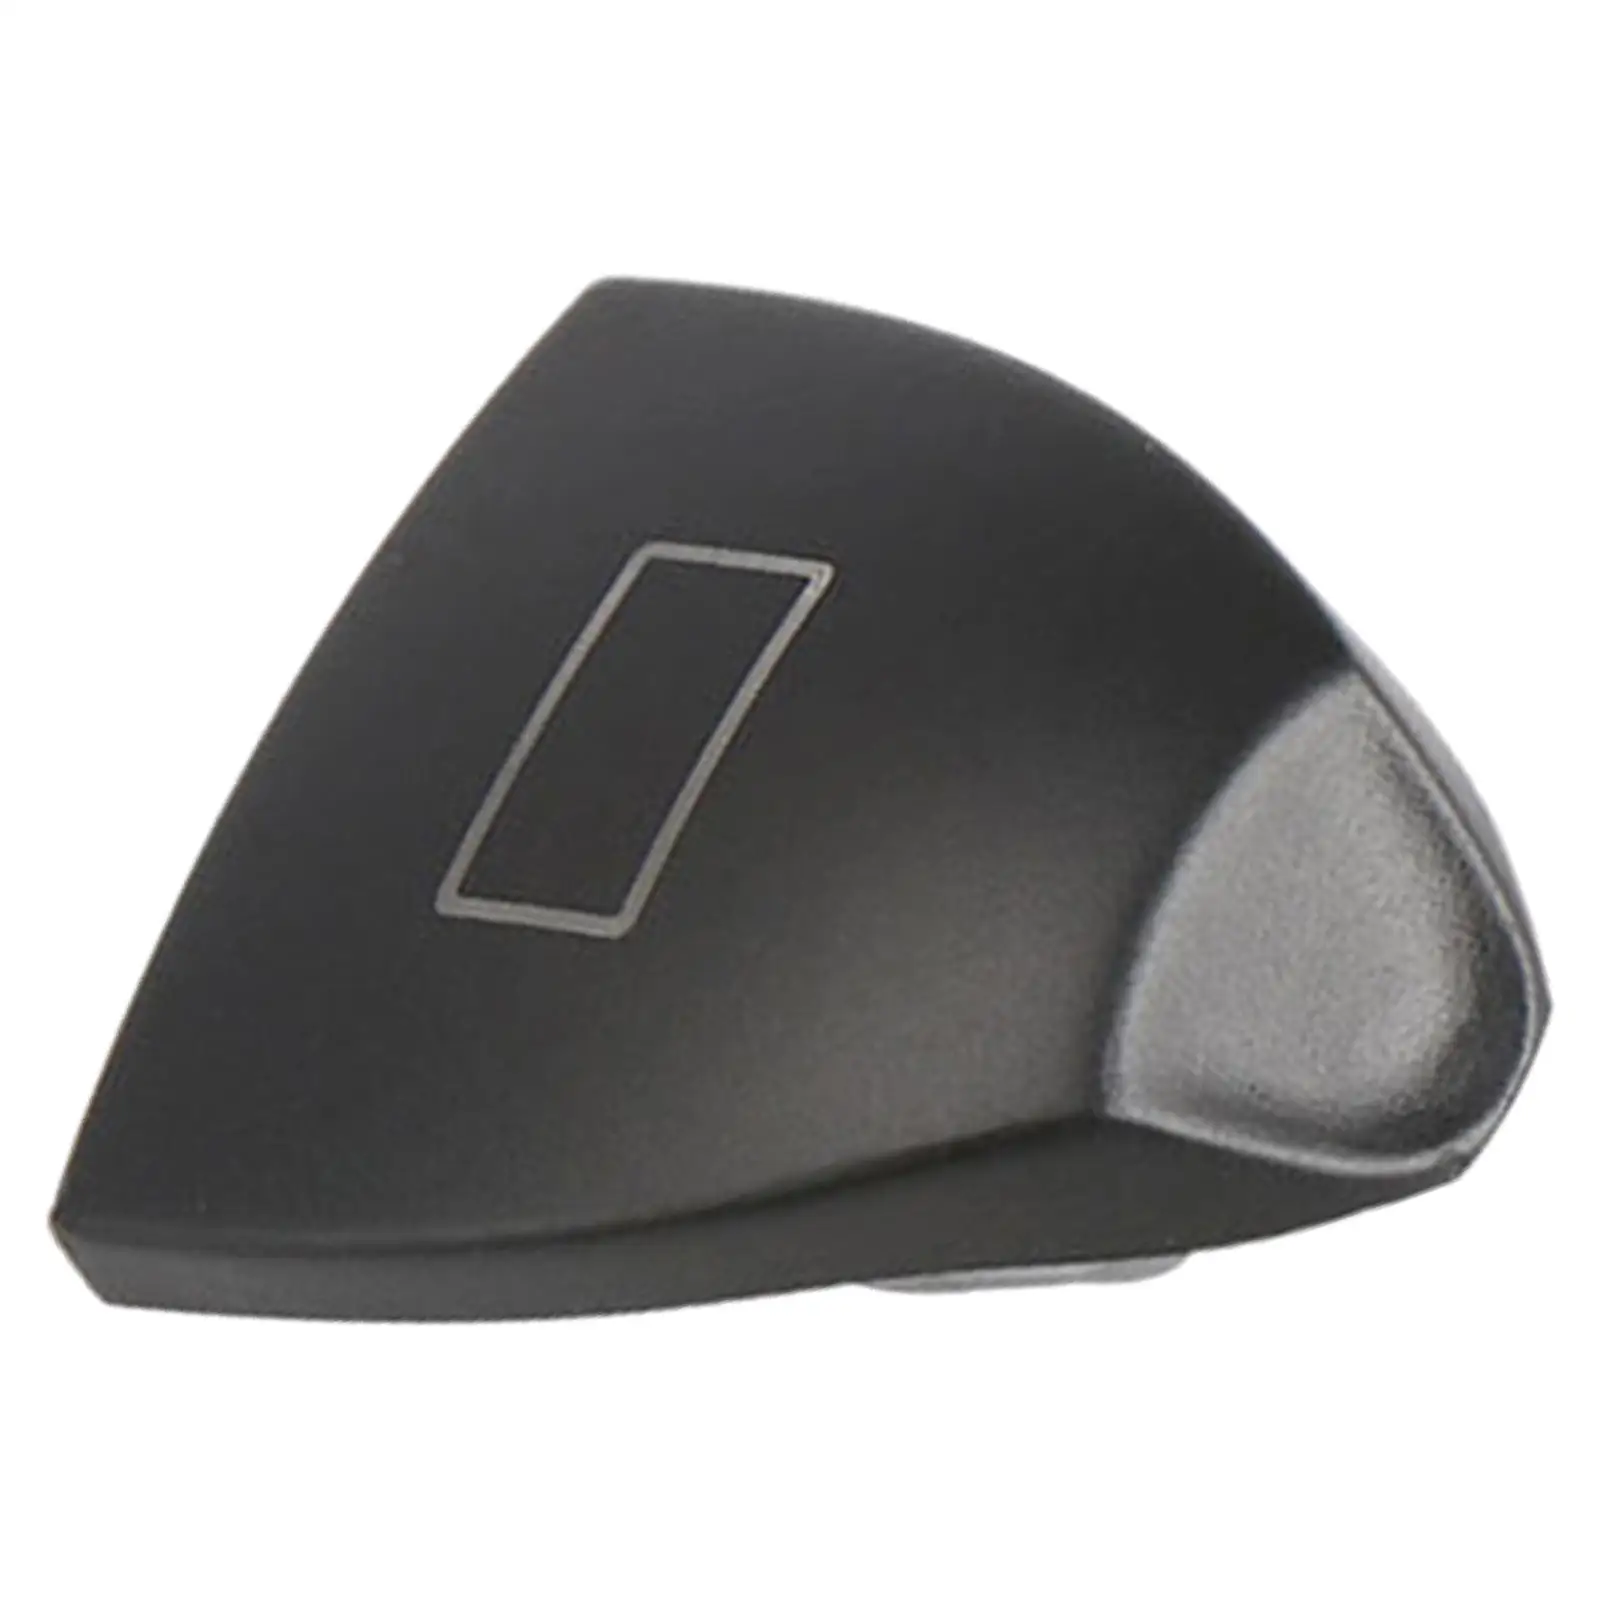 W211 Sunroof Window Switch Button Switch Button Cover Automotive Roof Control Panel Switch Car Fits for Benz E-Class 03-08